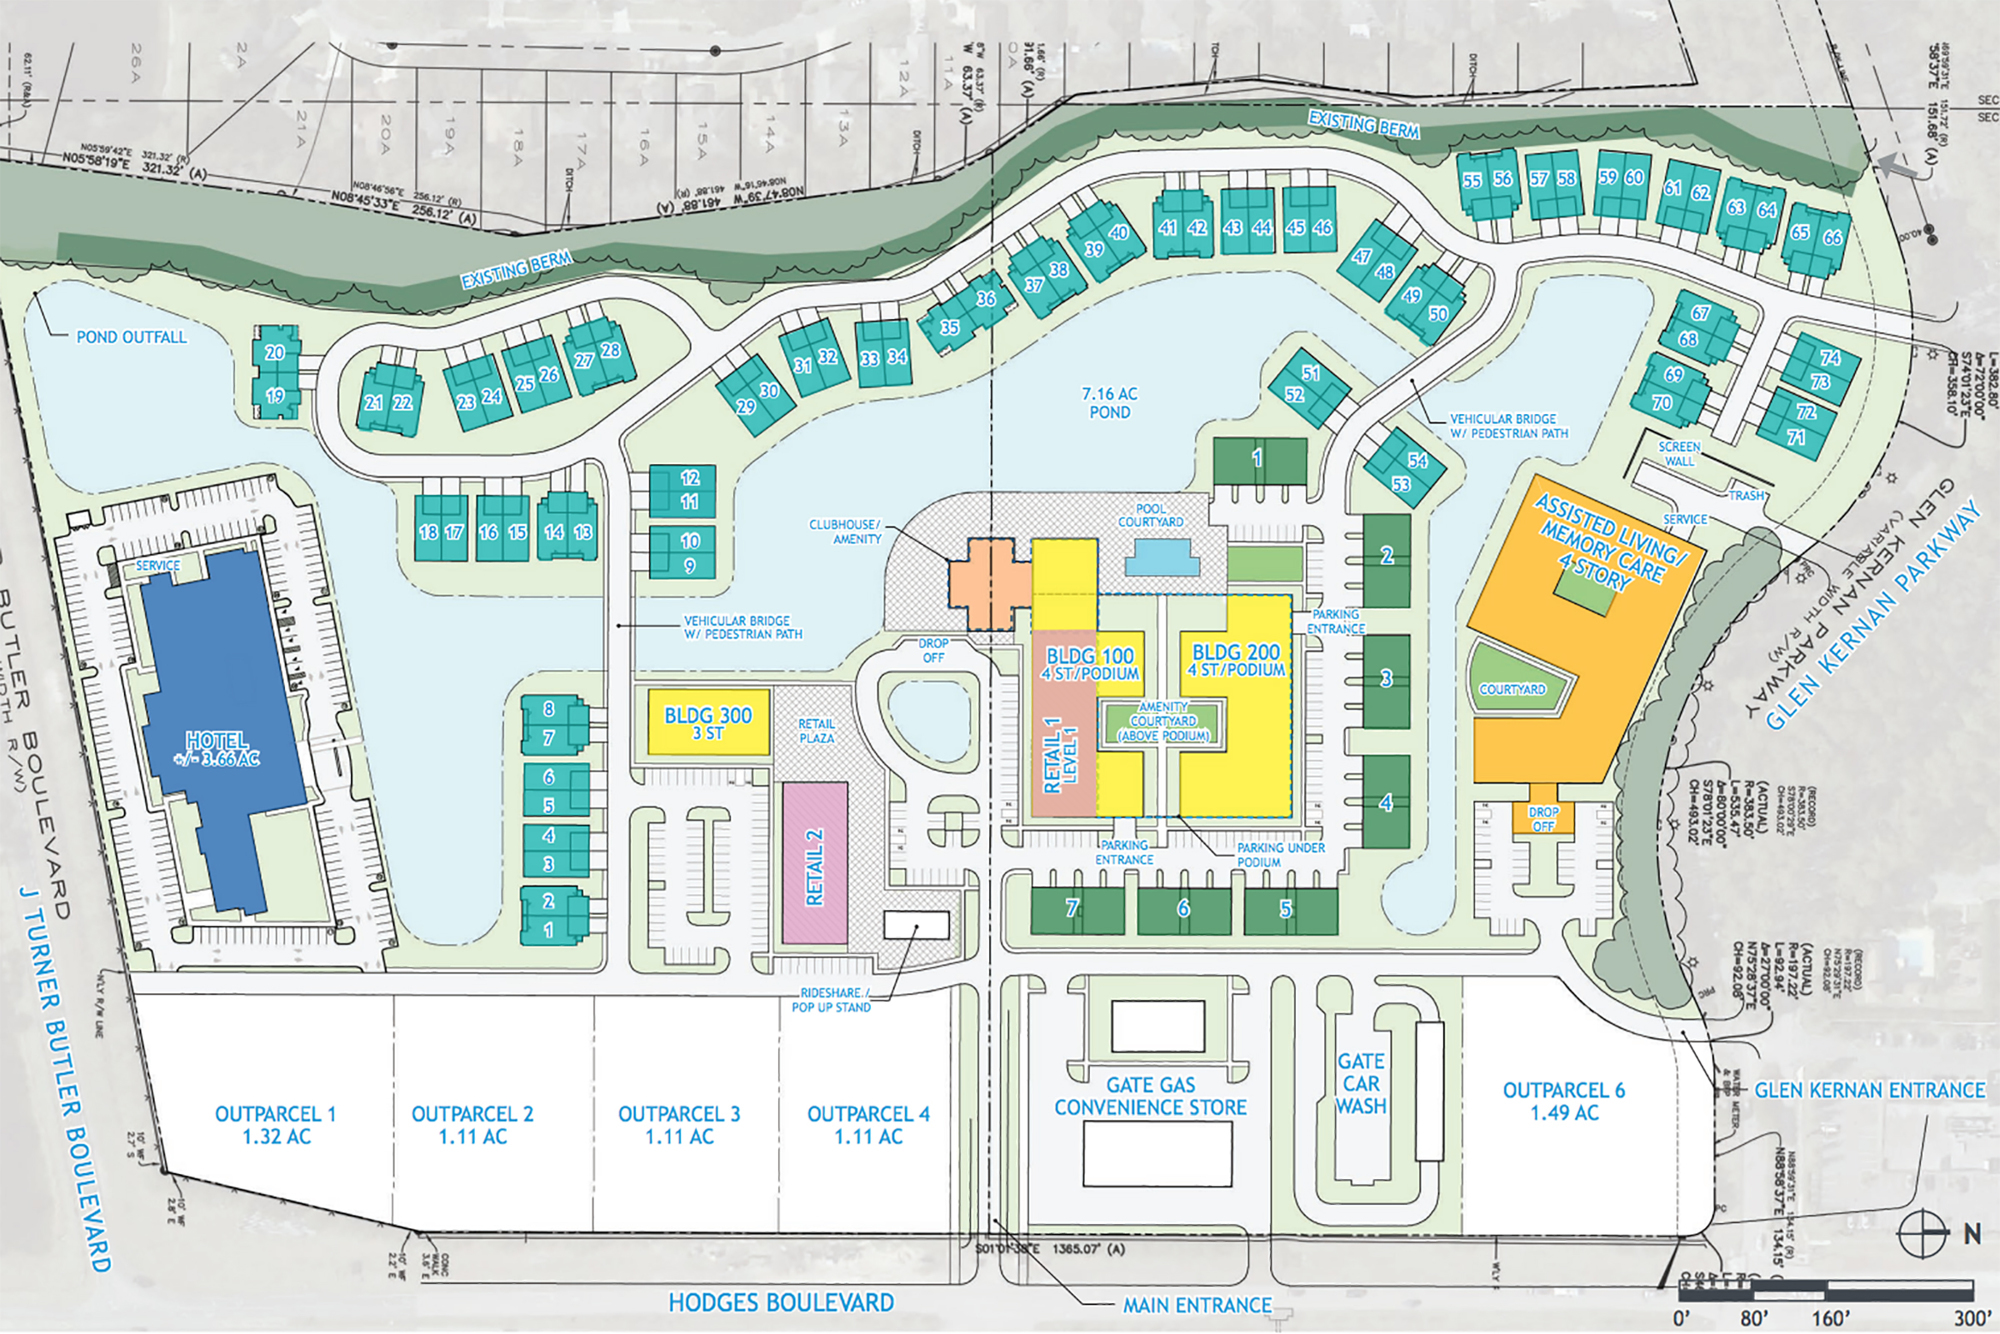 A previous site plan for the Glen Kernan Park. Culver’s is planned on Outparcel 4.